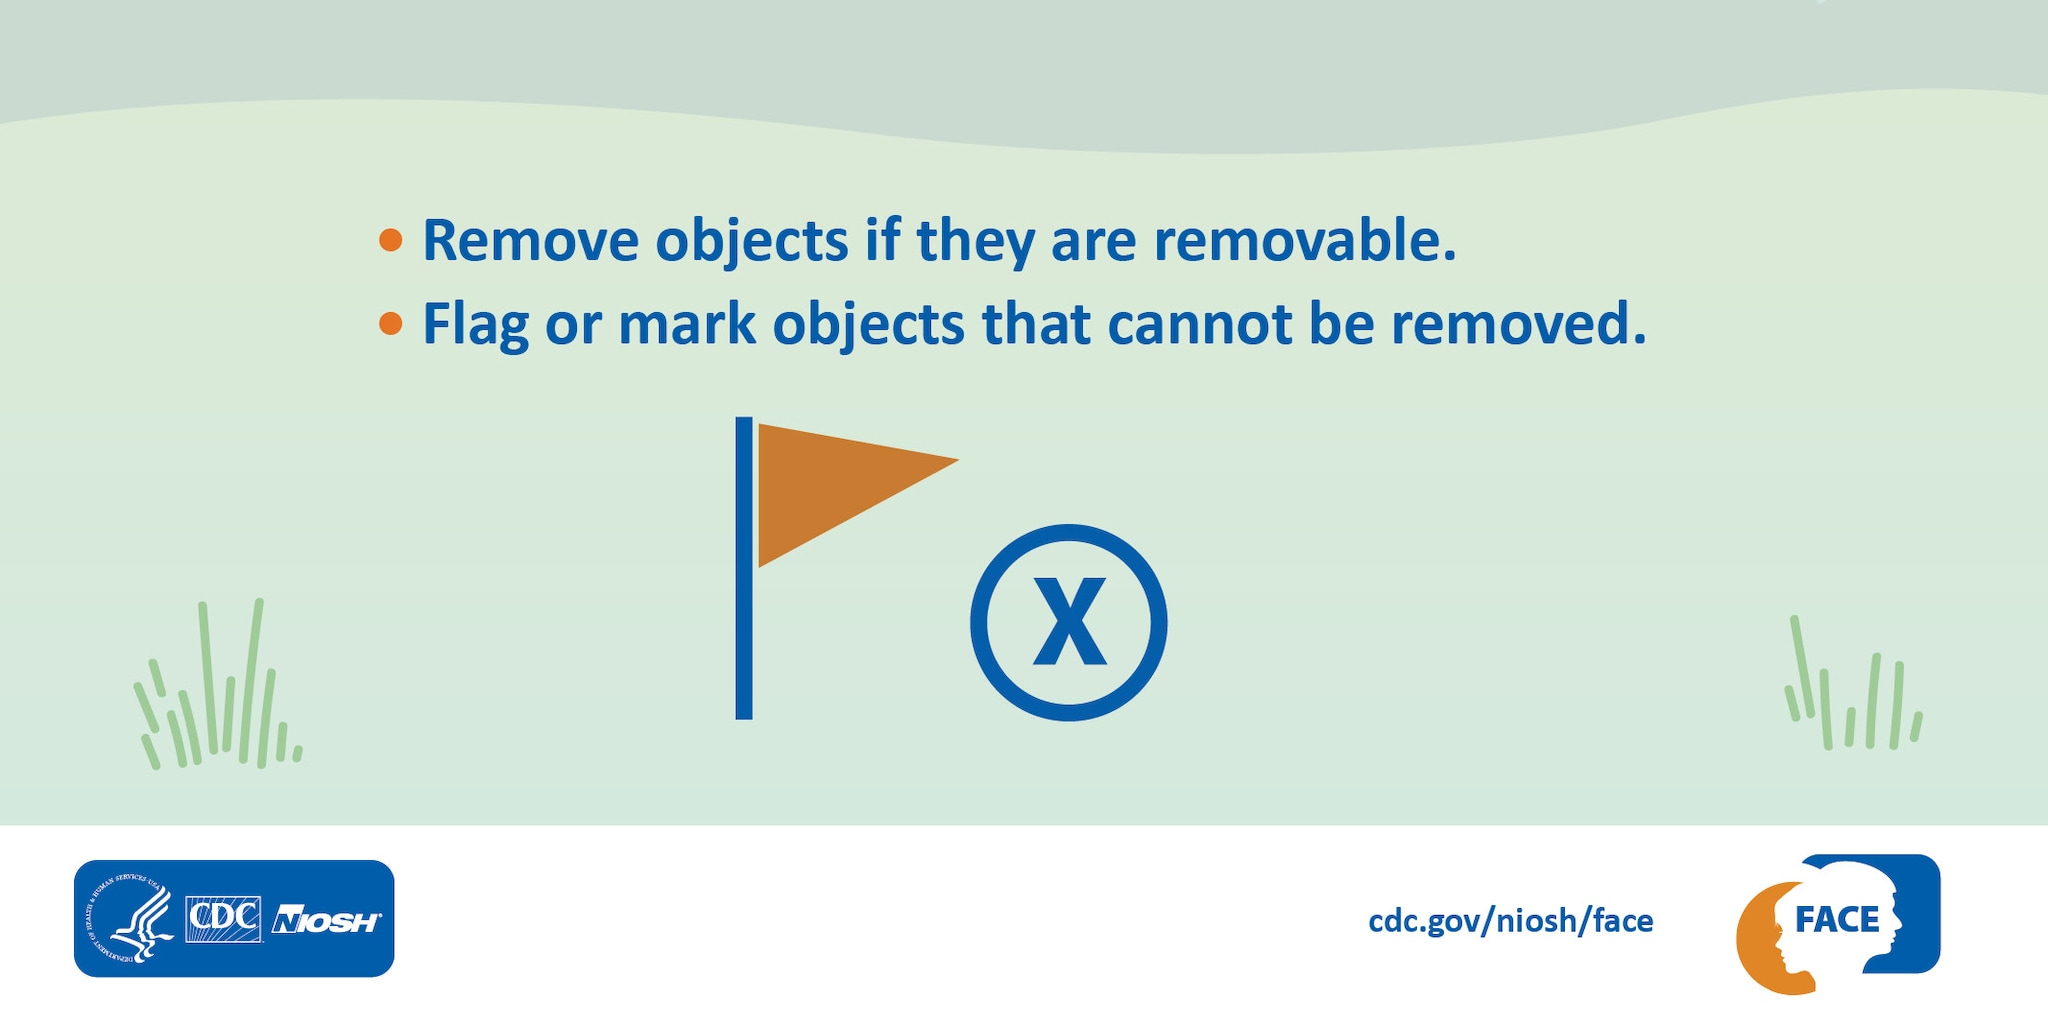 Remove objects if they are removable. Flag or mark objects that cannot be removed.